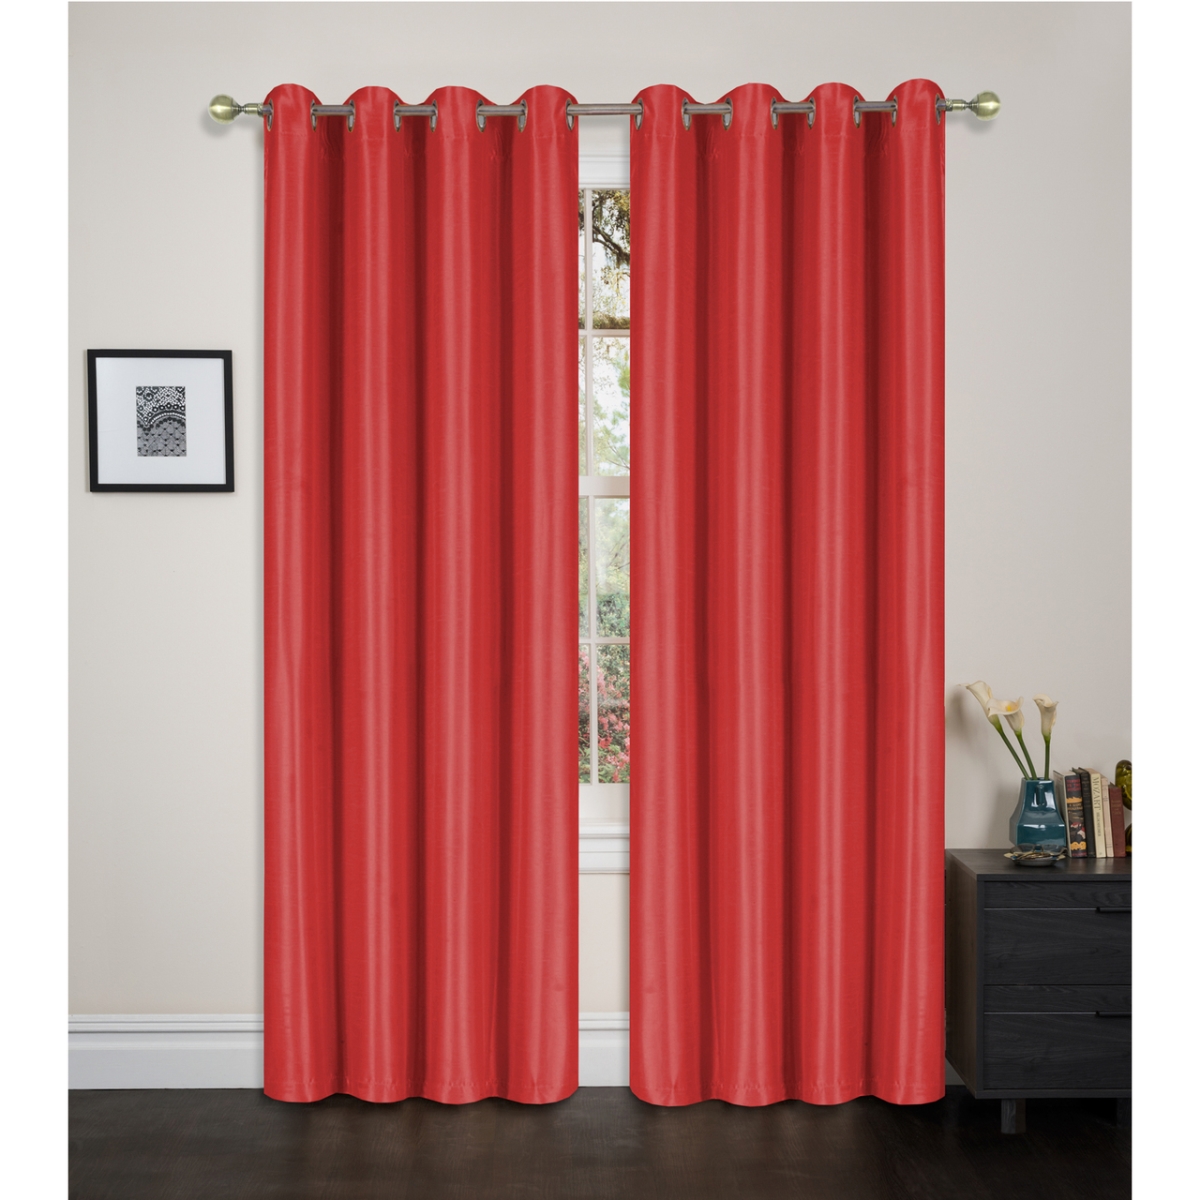 Ls-cp025702 54 X 84 In. Blackout Light Filtration Single Curtain Panel, Burgundy